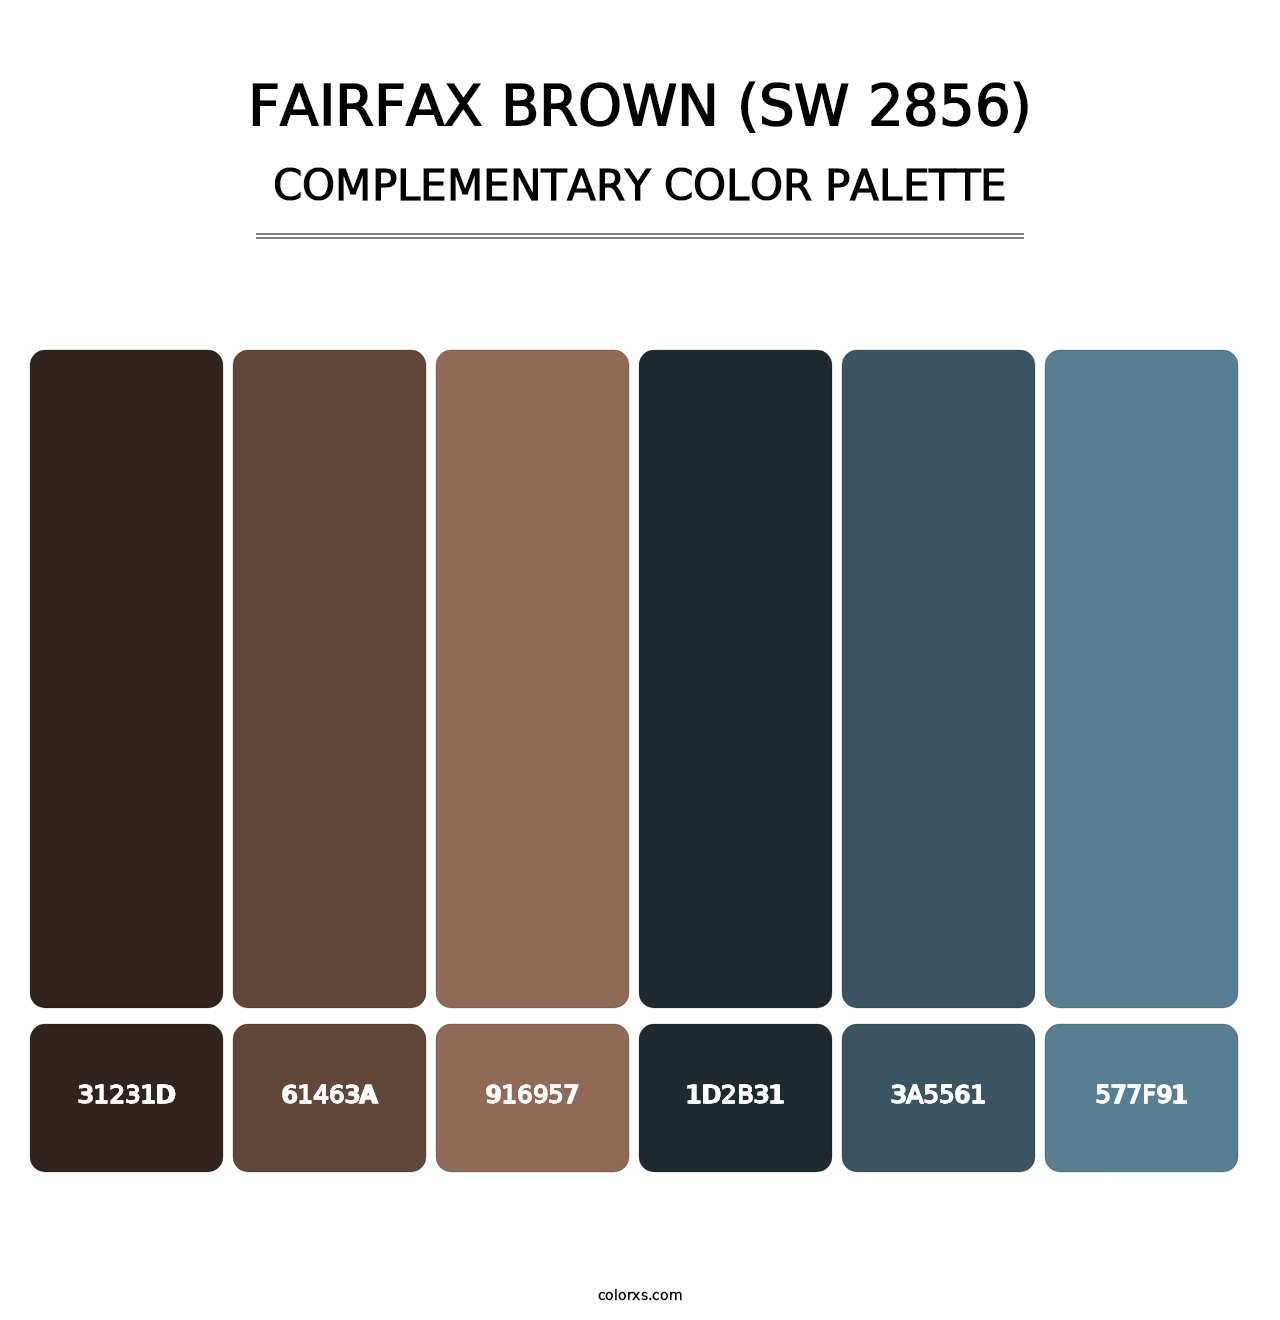 Fairfax Brown (SW 2856) - Complementary Color Palette